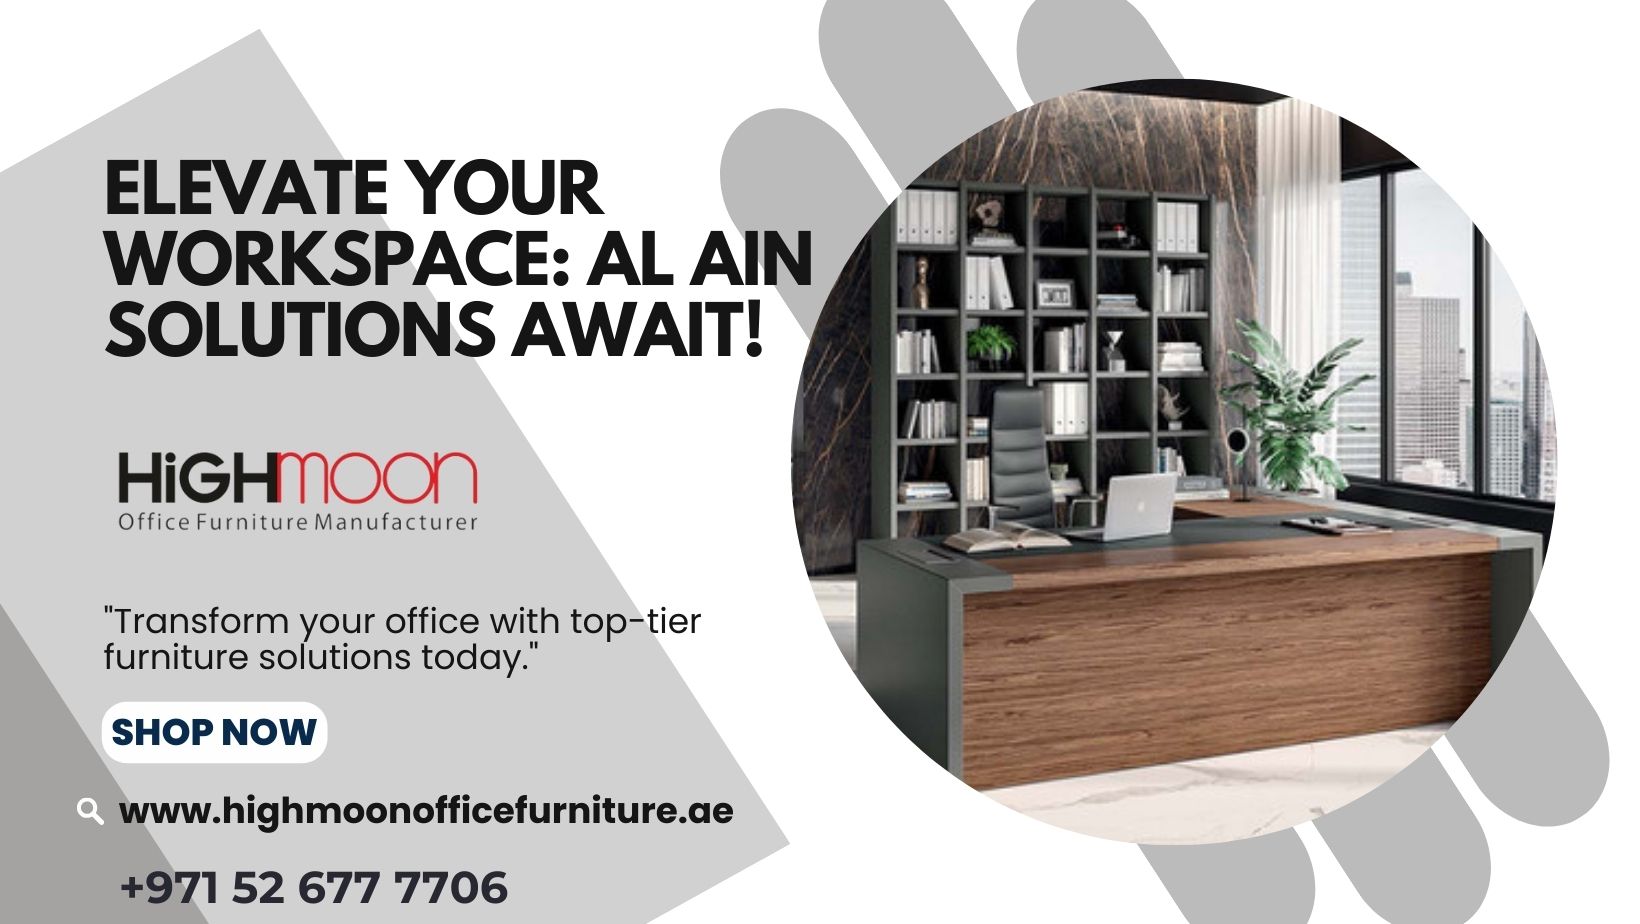 Al Ain Office Furniture Solutions